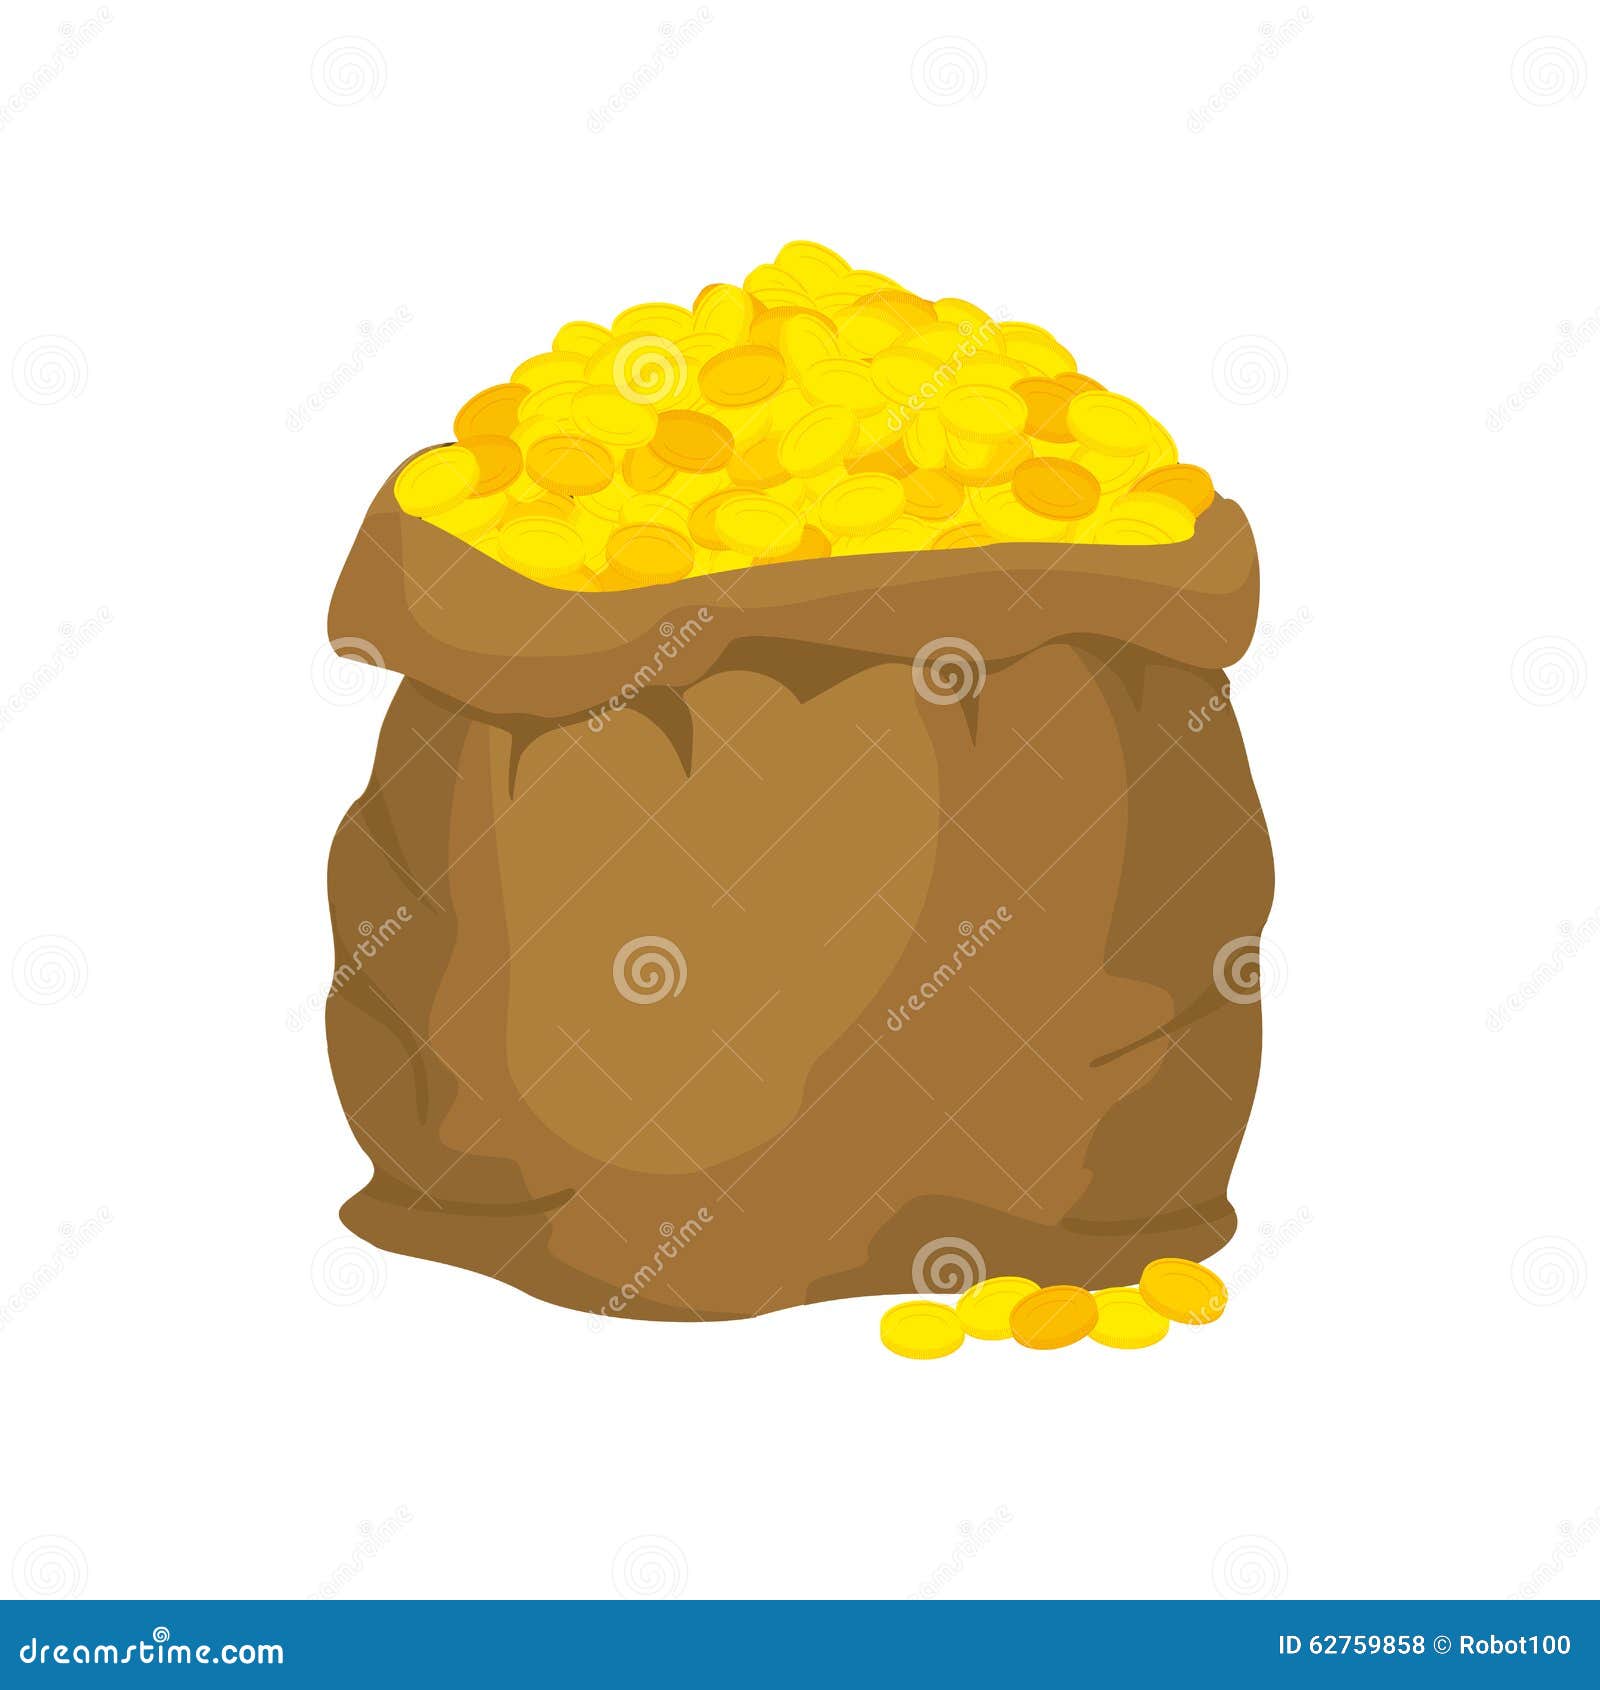 Bag of Gold. Many Gold Coins. Open Sack Full of Treasures Stock Vector ...